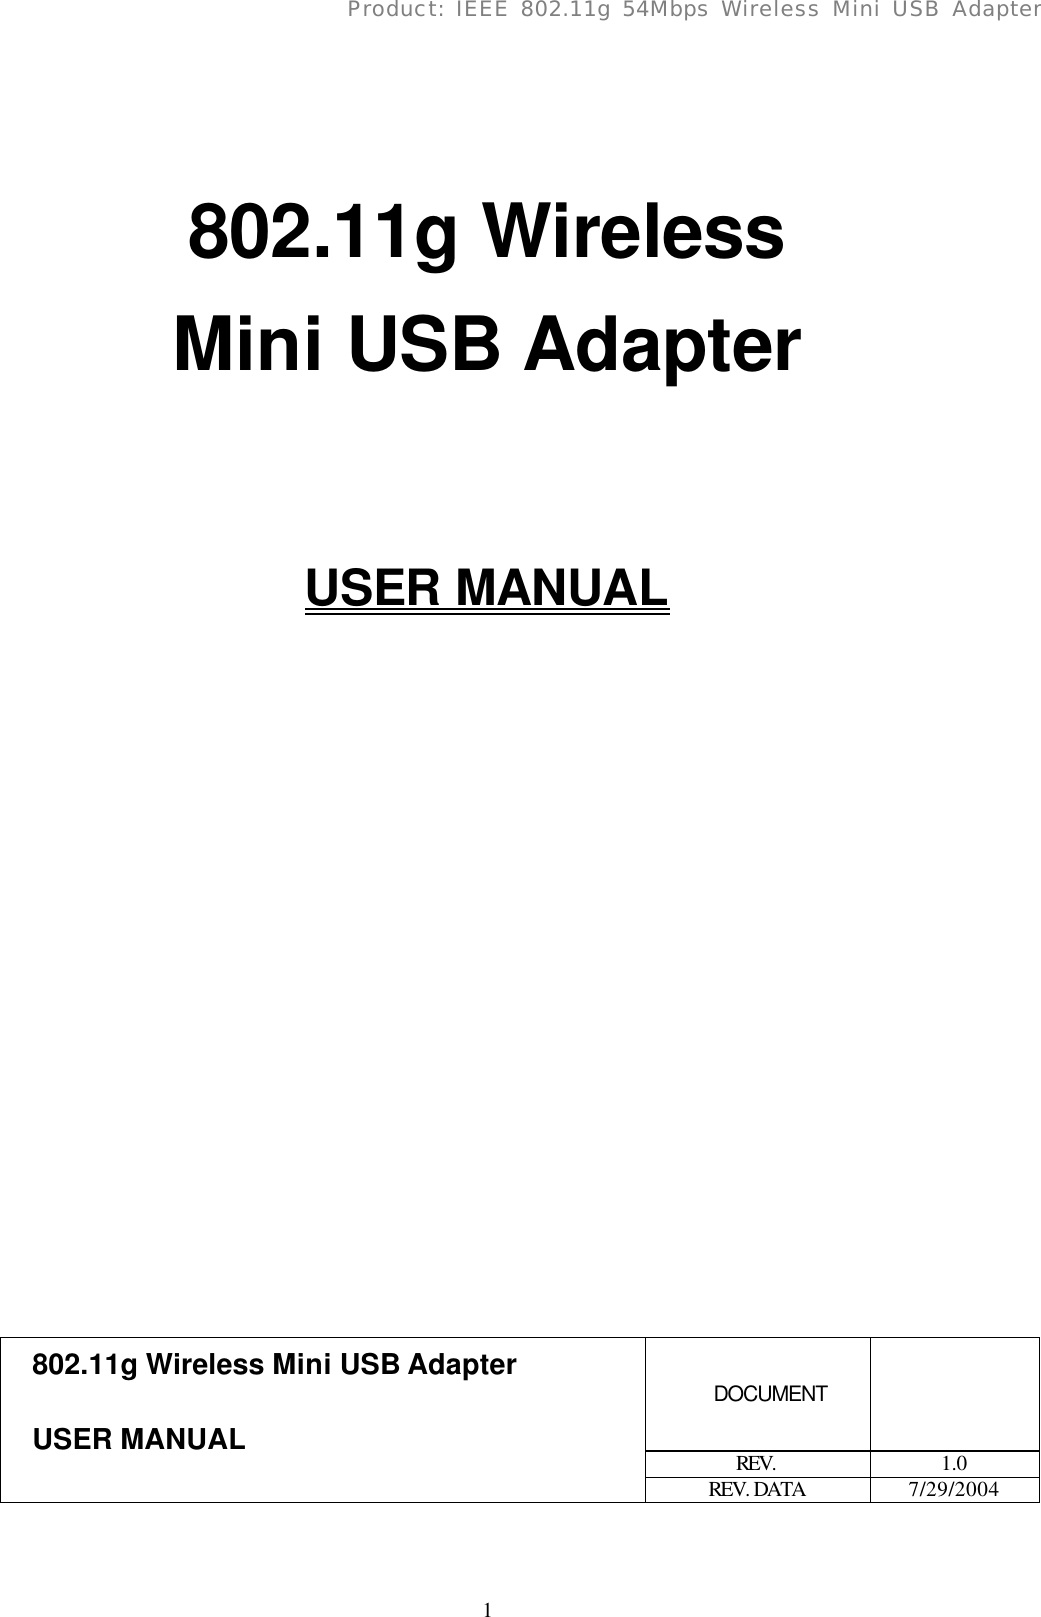      1 Product: IEEE 802.11g 54Mbps Wireless Mini USB Adapter   802.11g Wireless Mini USB Adapter   USER MANUAL                              DOCUMENT  REV.  1.0 802.11g Wireless Mini USB Adapter USER MANUAL REV. DATA 7/29/2004 